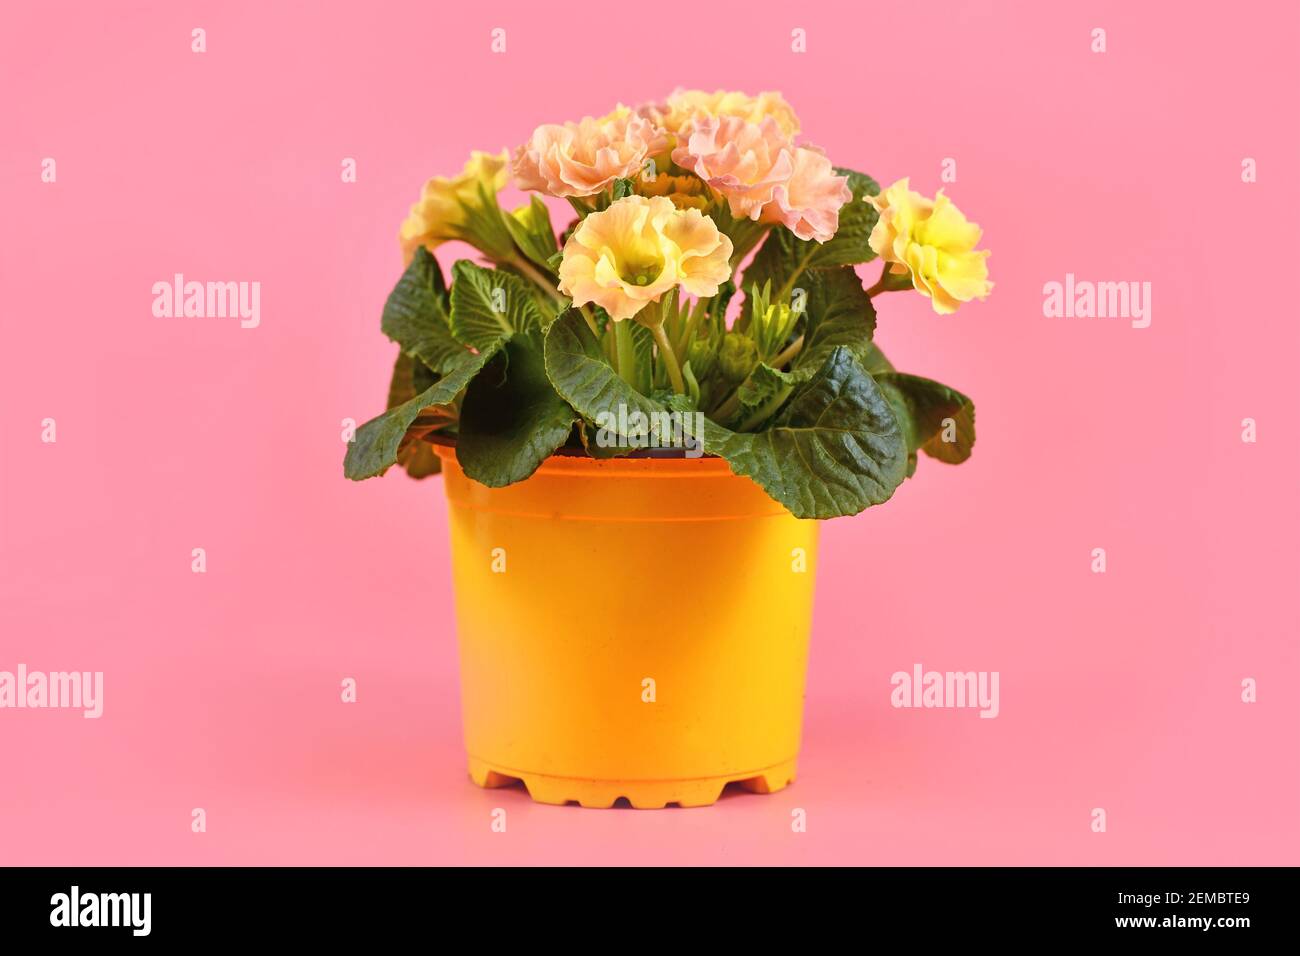 Potted yellow and pink primrose 'Primula Acaulis' blooming springflowers in flower pot on pink background Stock Photo